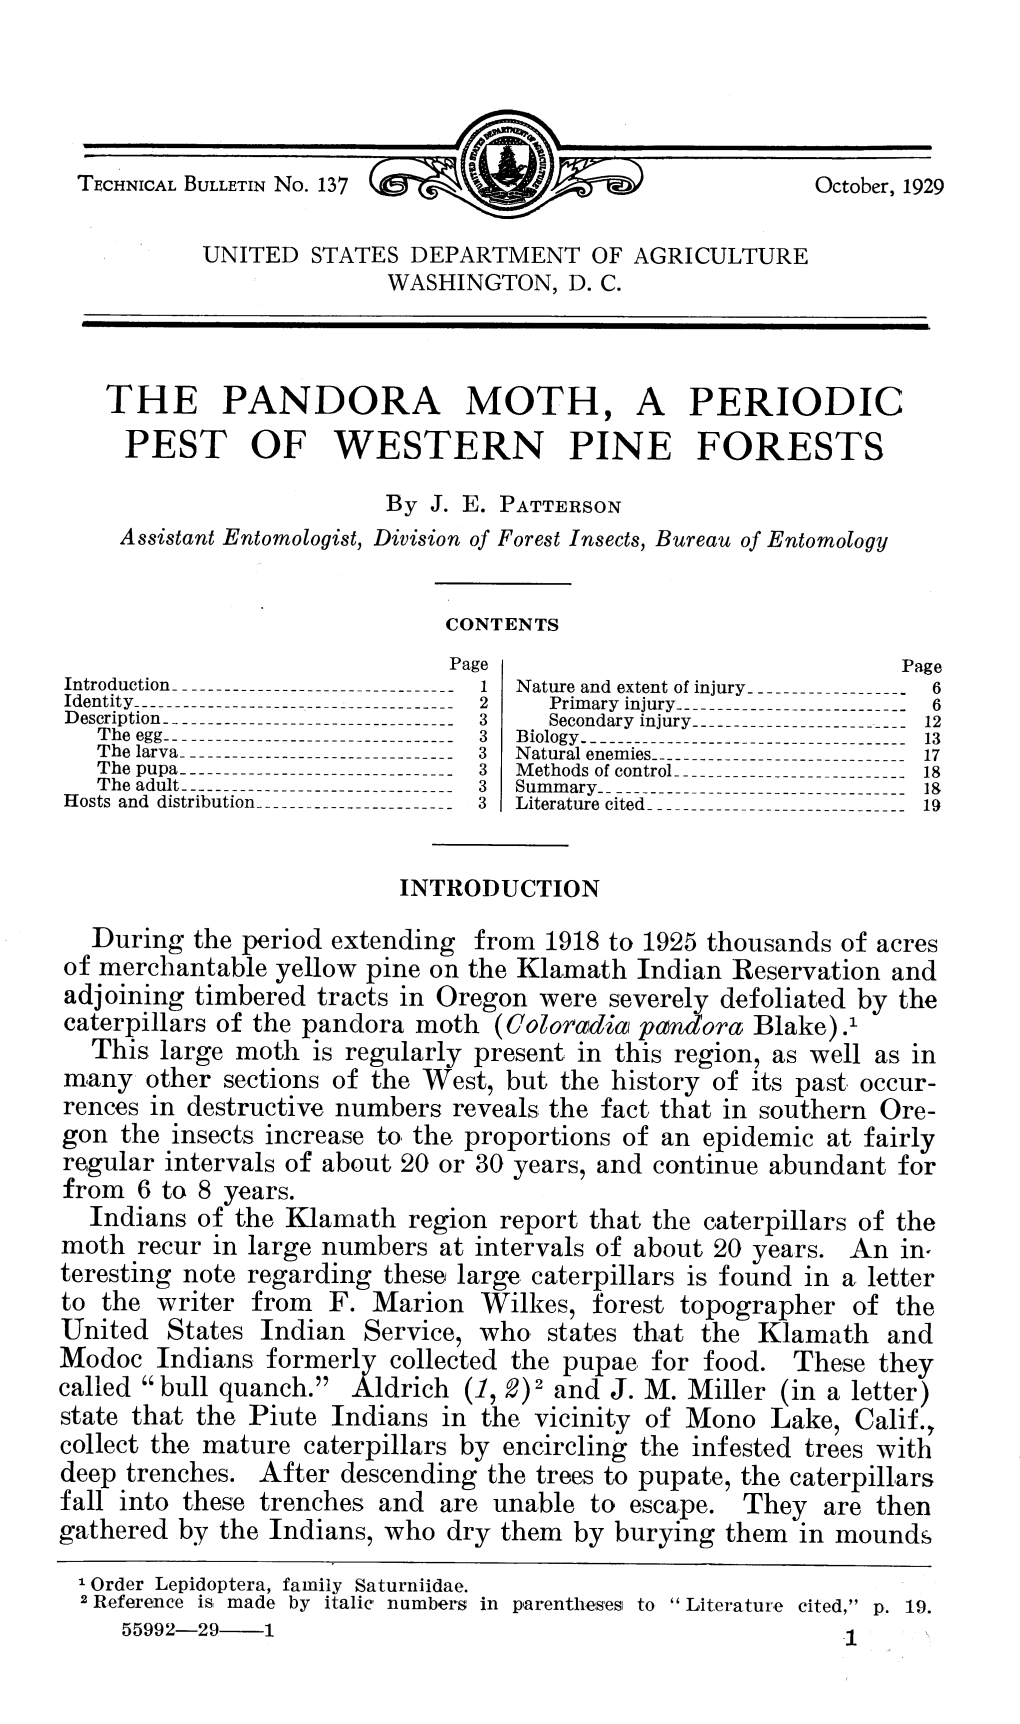 The Pandora Moth, a Periodic Pest of Western Pine Forests